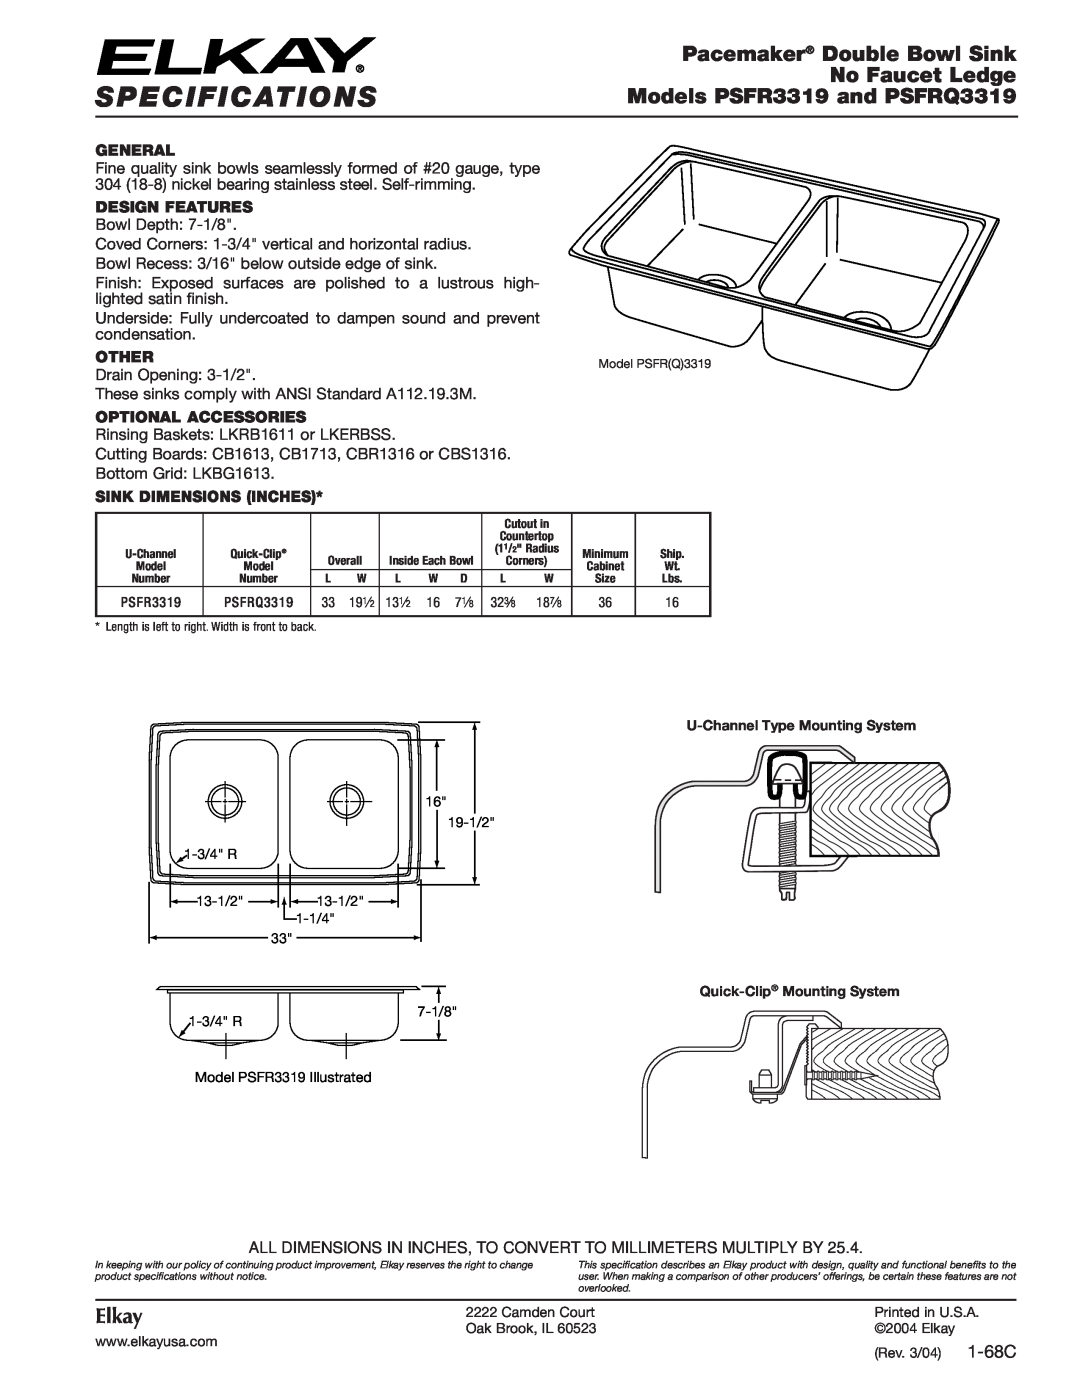 Elkay specifications Specifications, Pacemaker Double Bowl Sink, No Faucet Ledge, Models PSFR3319 and PSFRQ3319, Elkay 